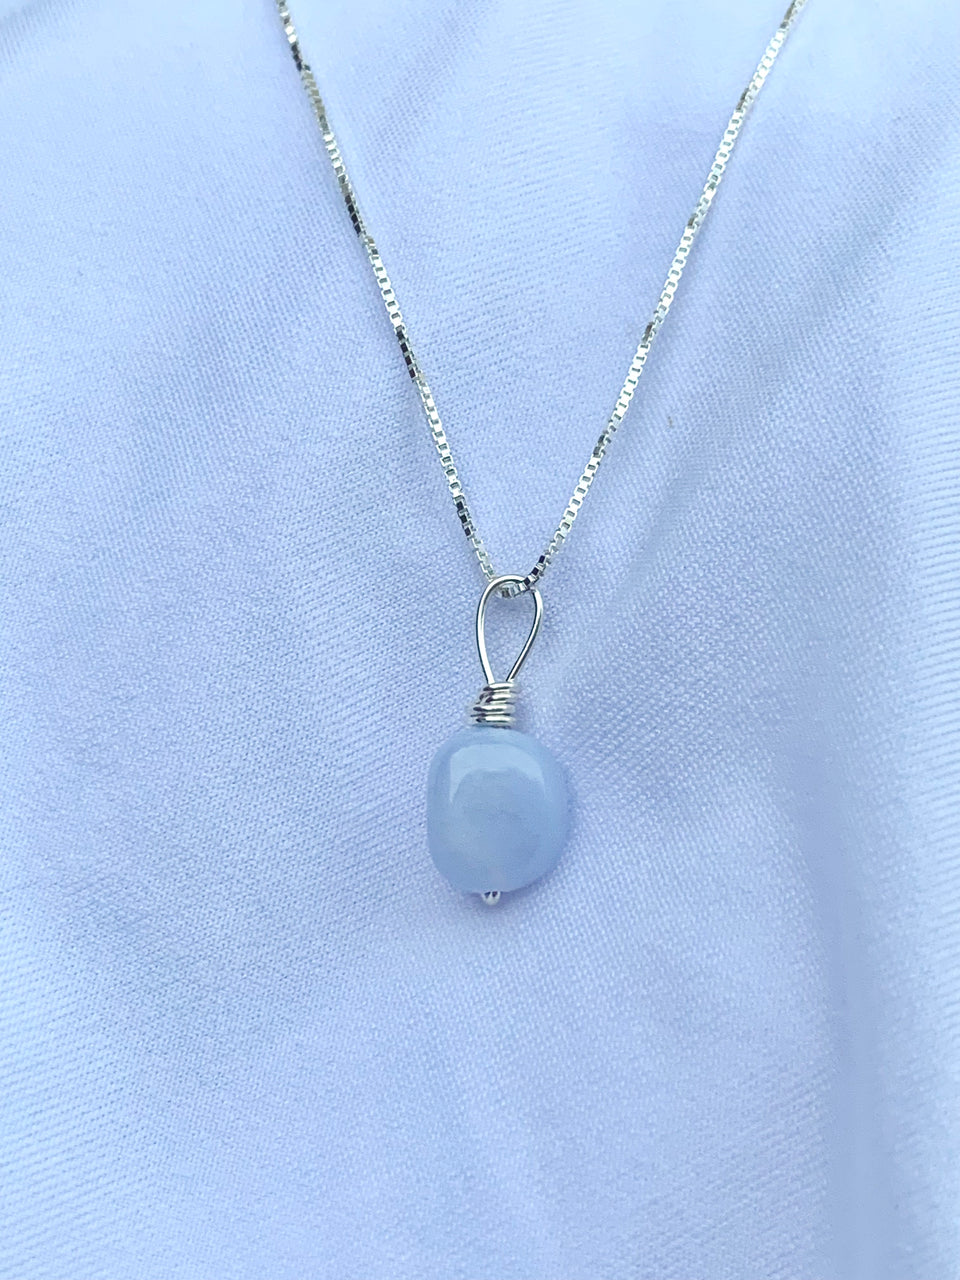 Blue chalcedony sterling silver necklace